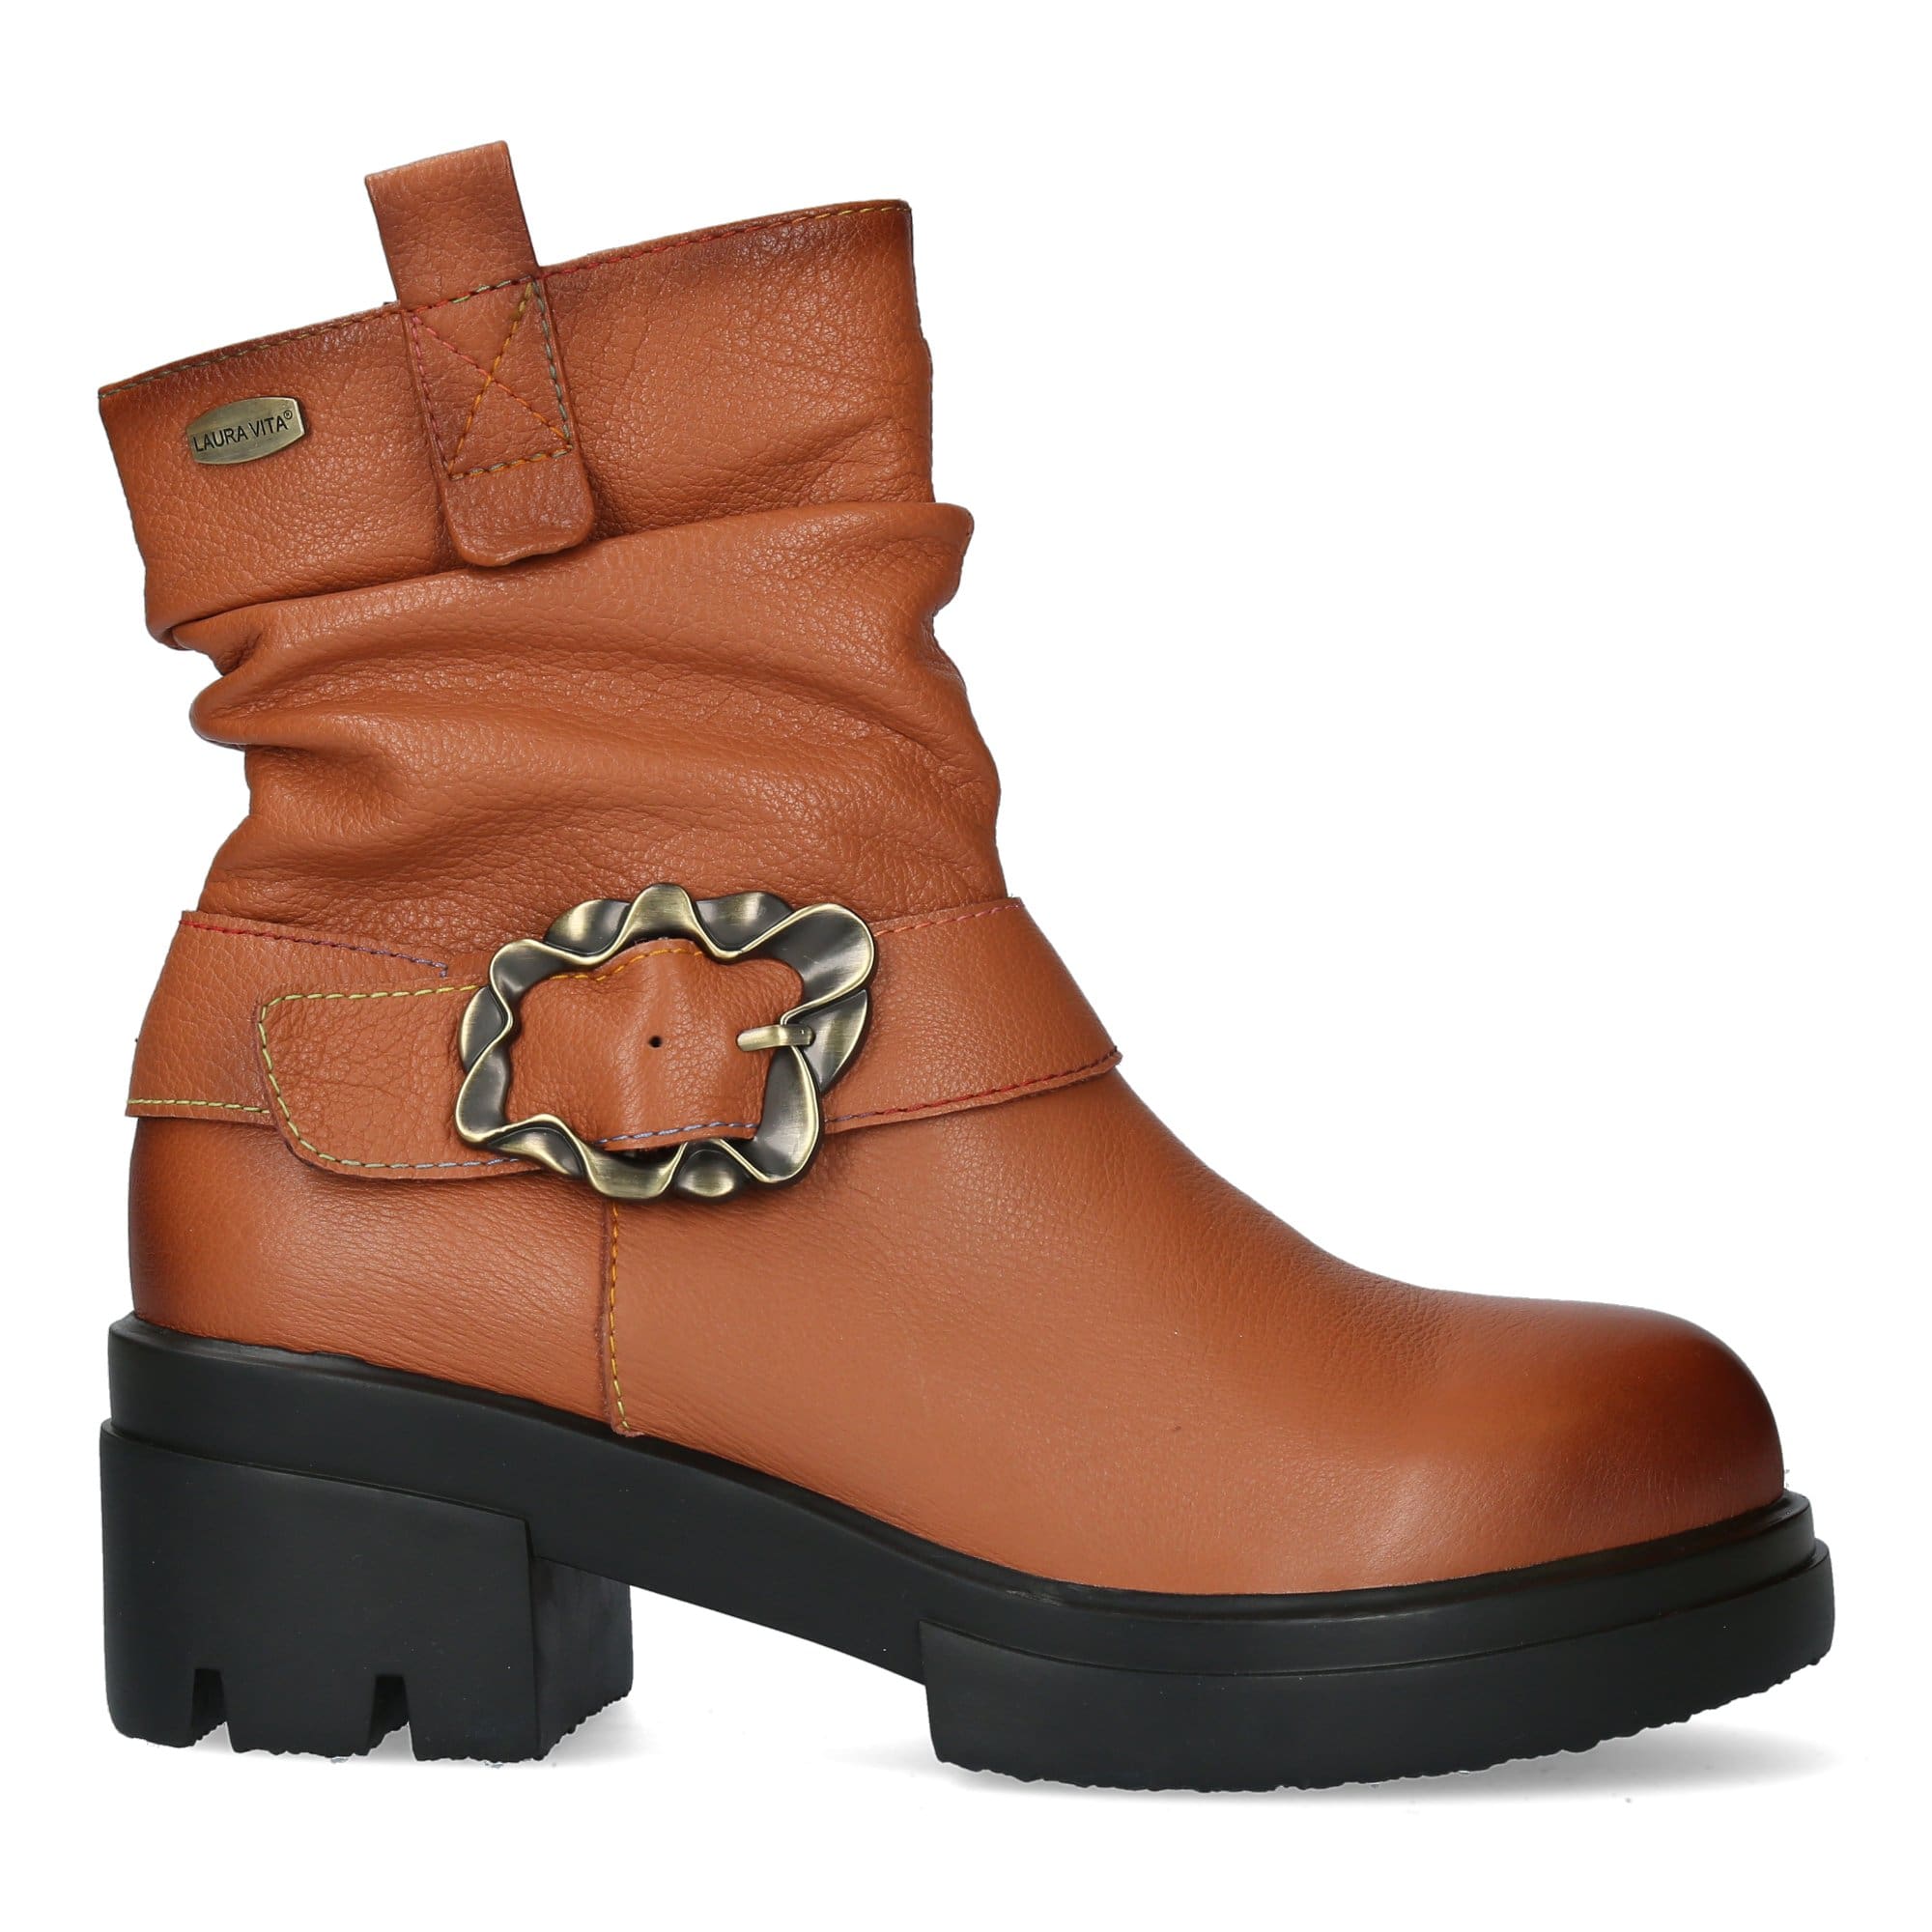 GOCNEO 81 - 35 / Camel - Boots